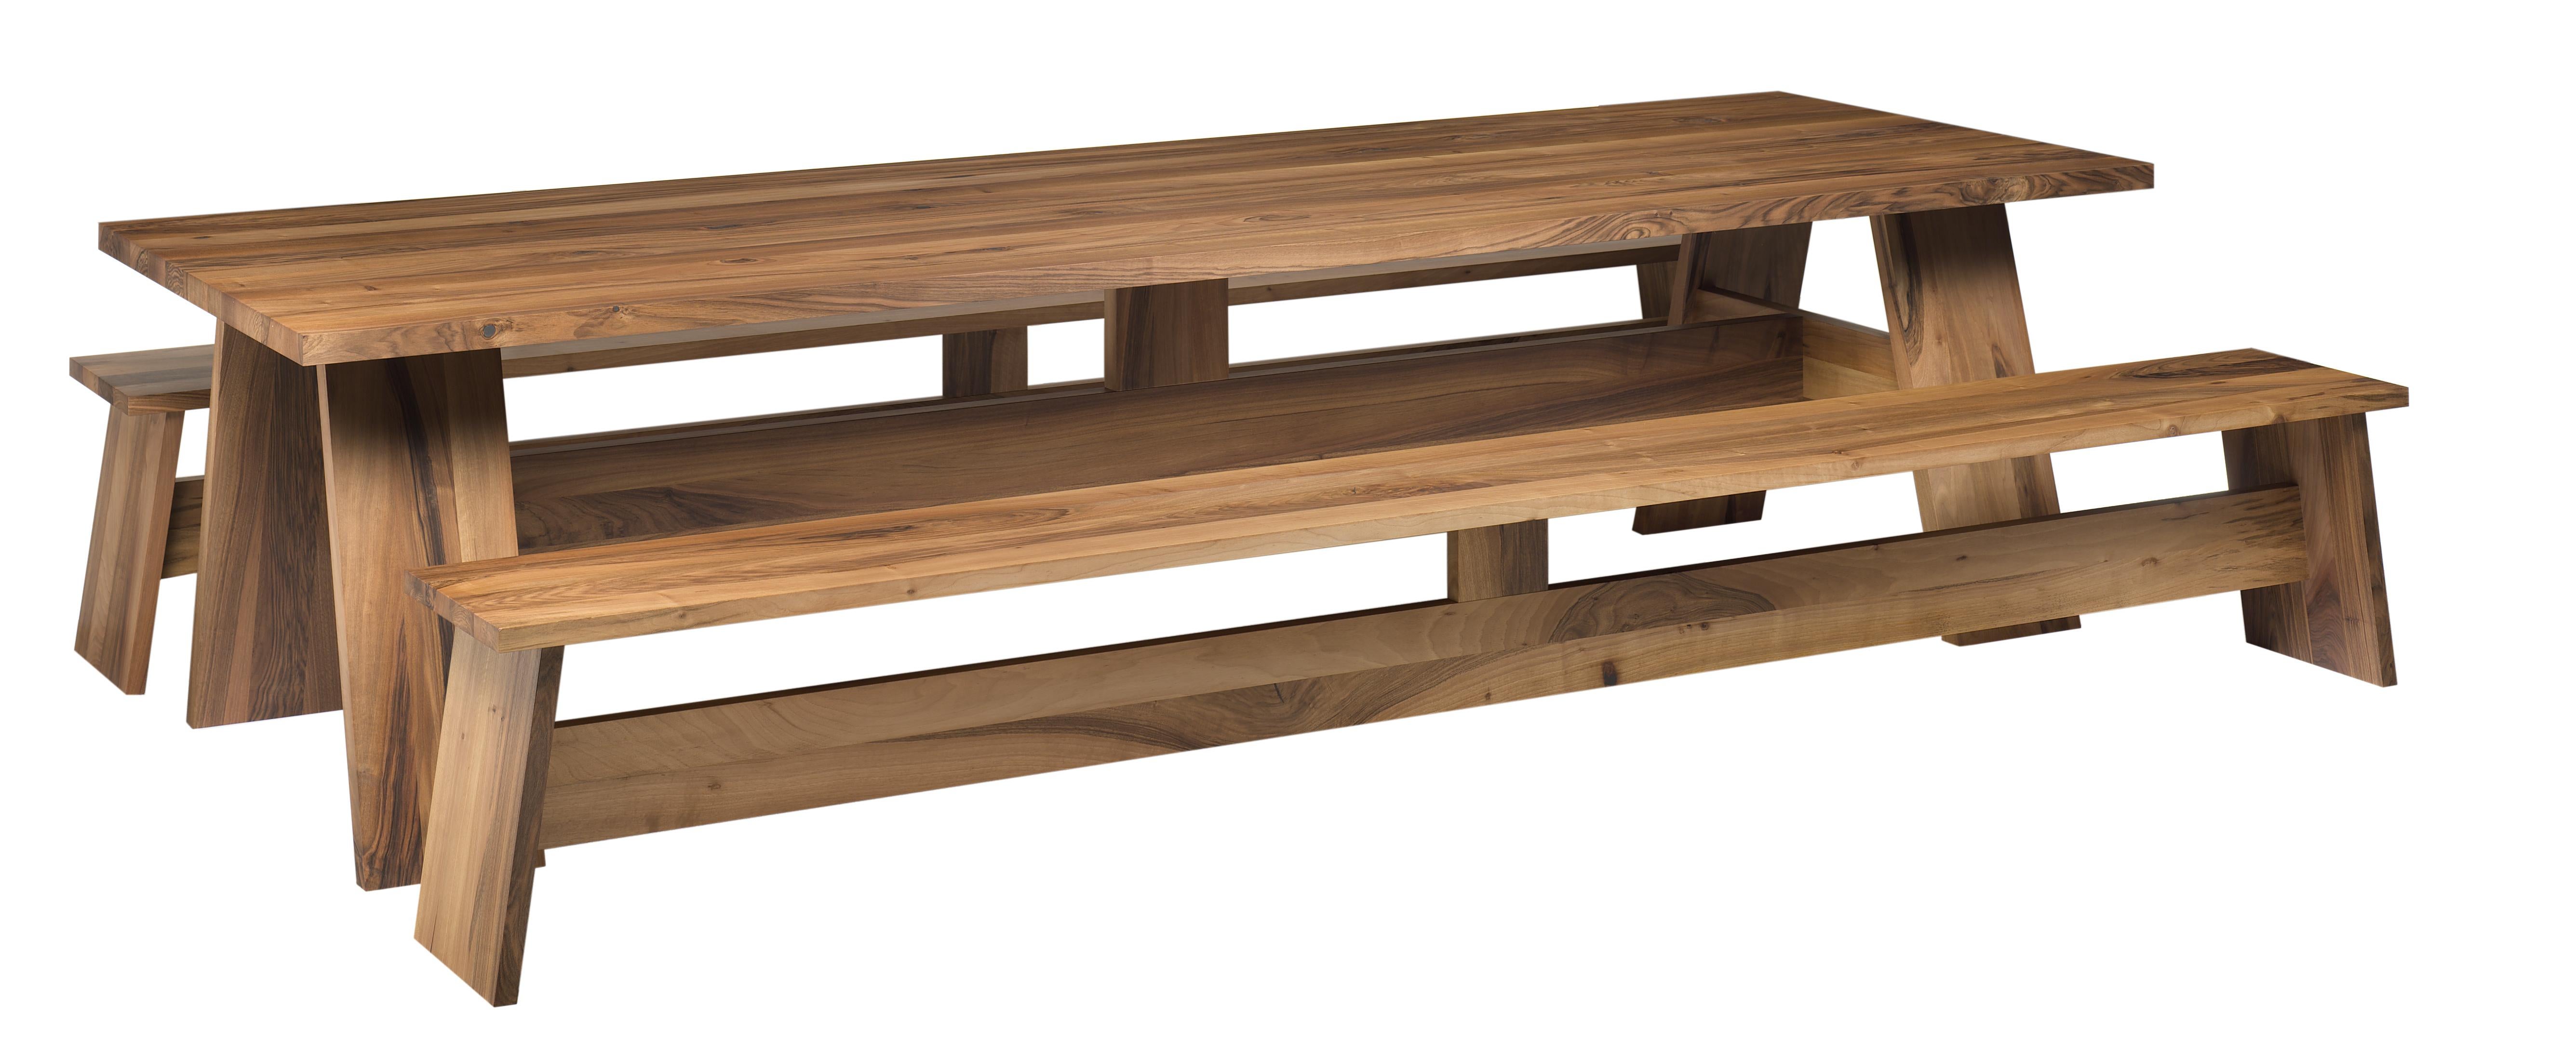 German e15 Customizable Fawley Wood Bench by David Chipperfield For Sale